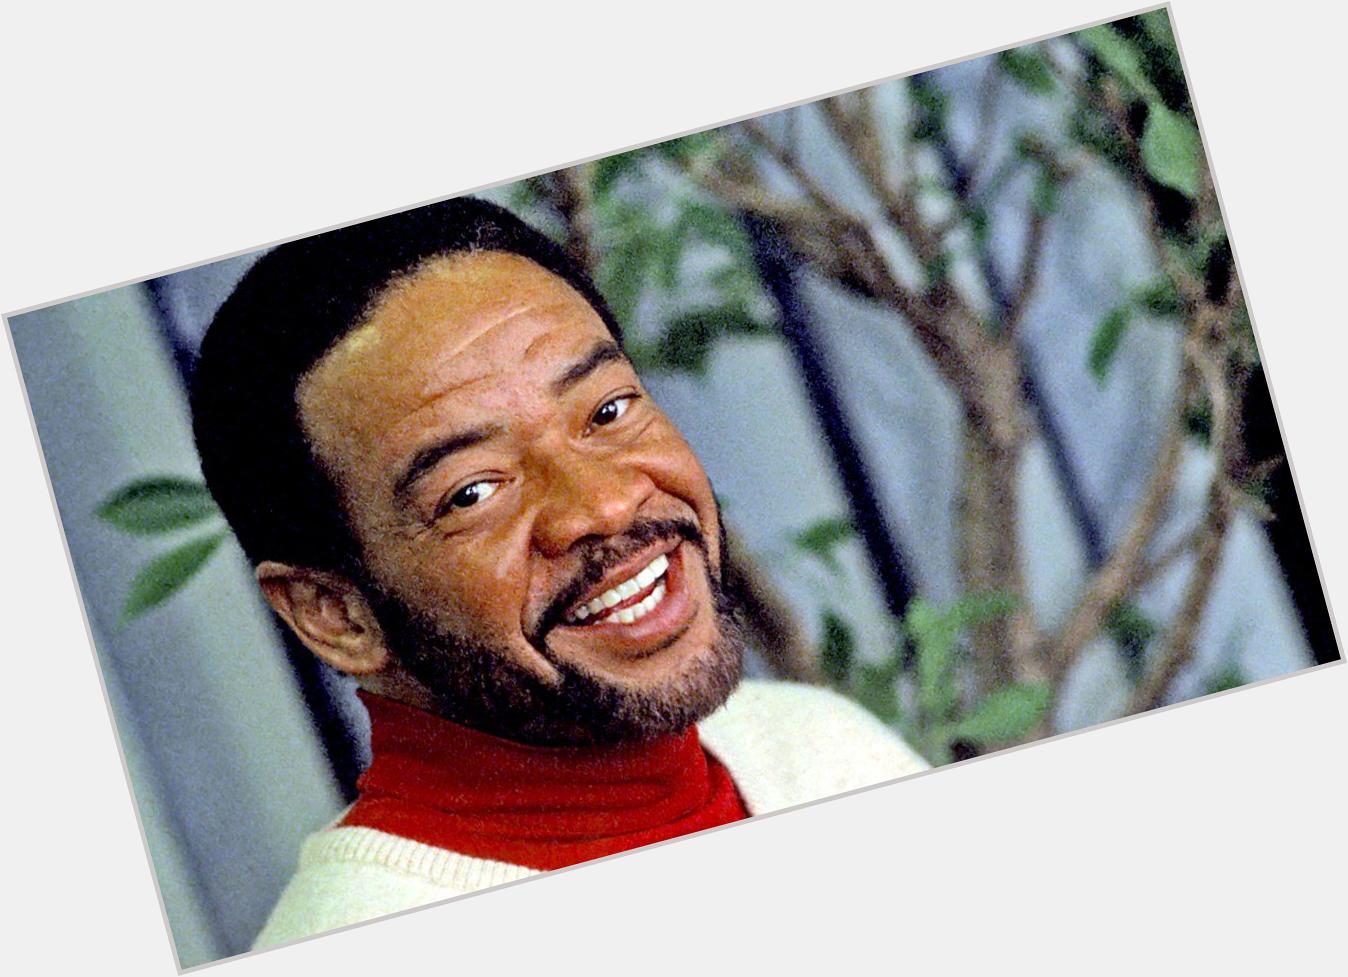 Happy birthday to Bill Withers! Enjoy your lovely day! 